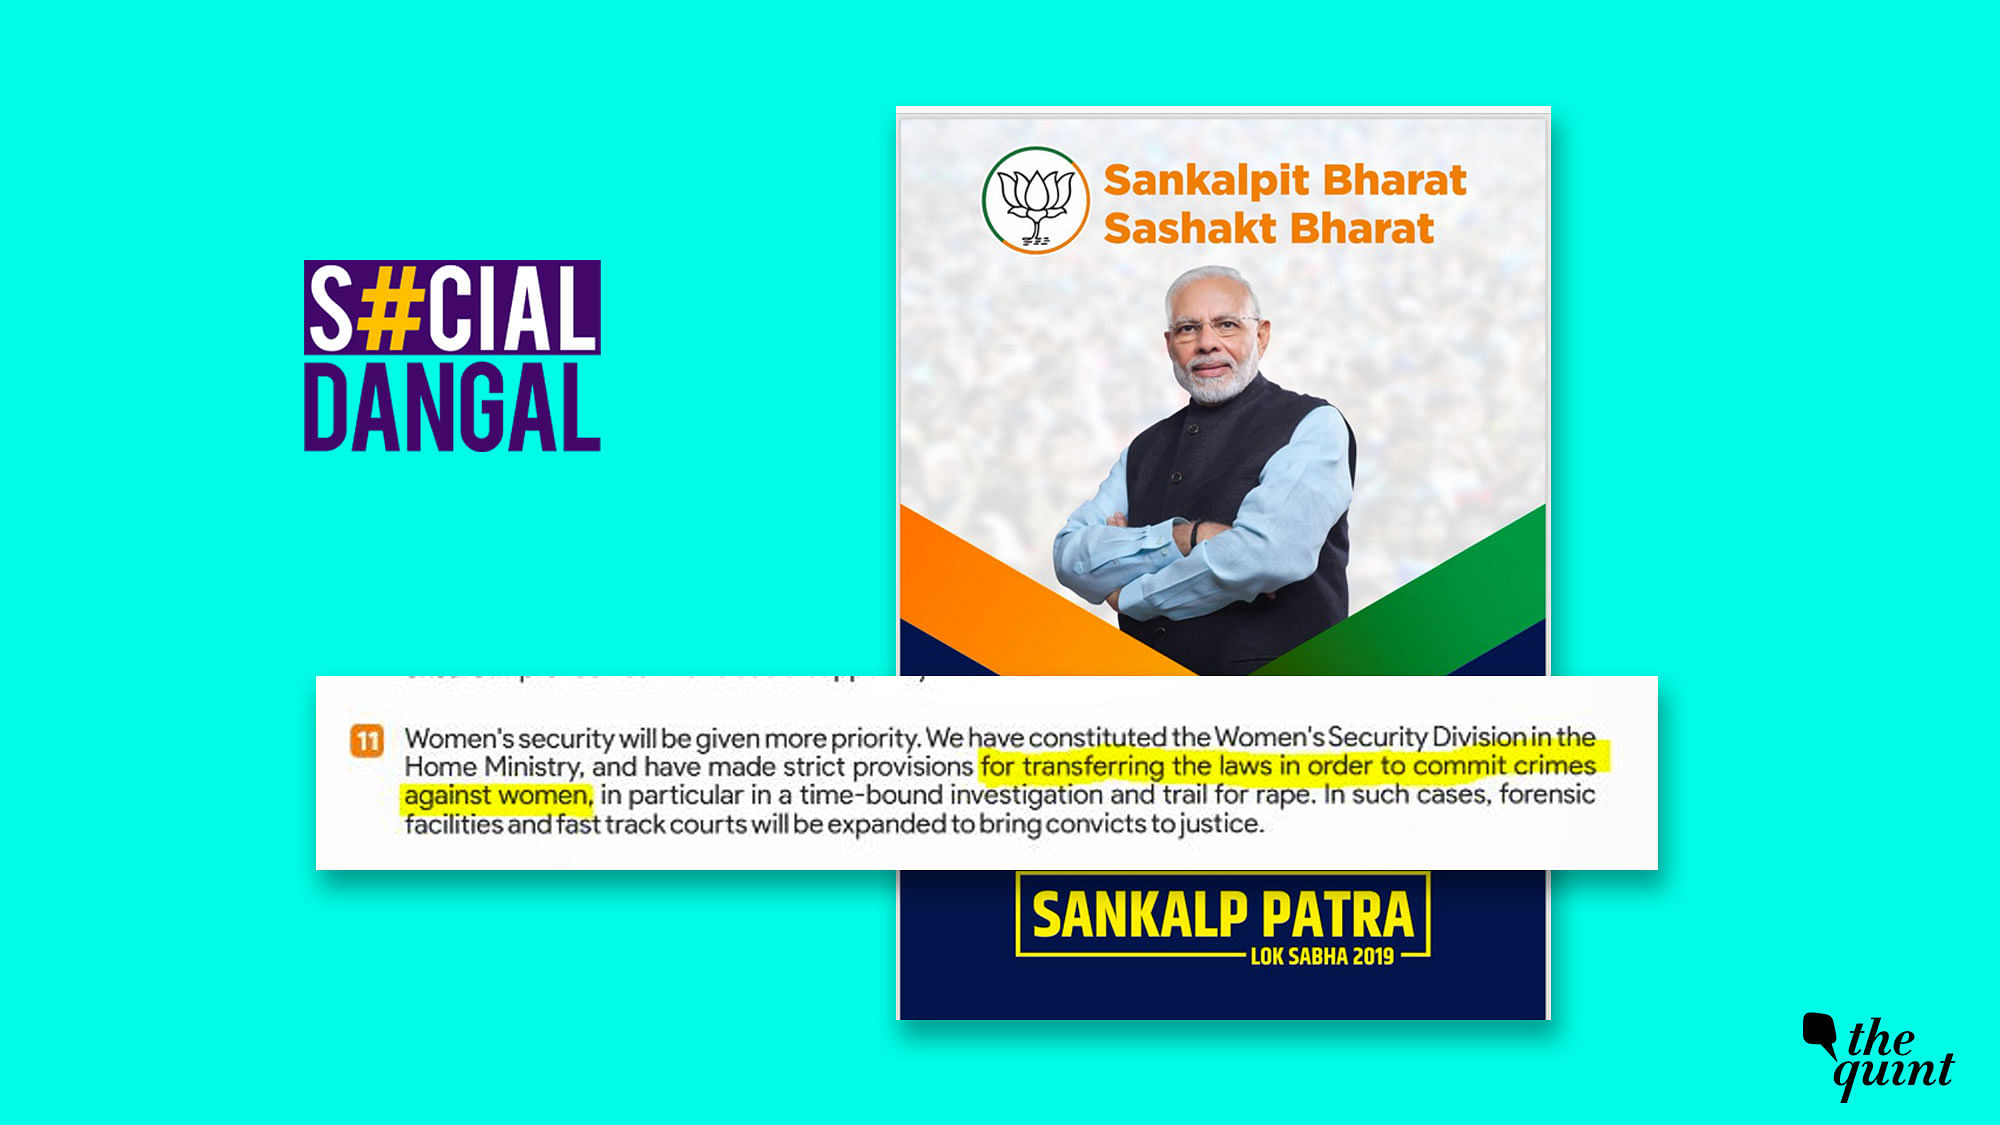 Twitterati pointed out the errors in BJP’s Manifesto.